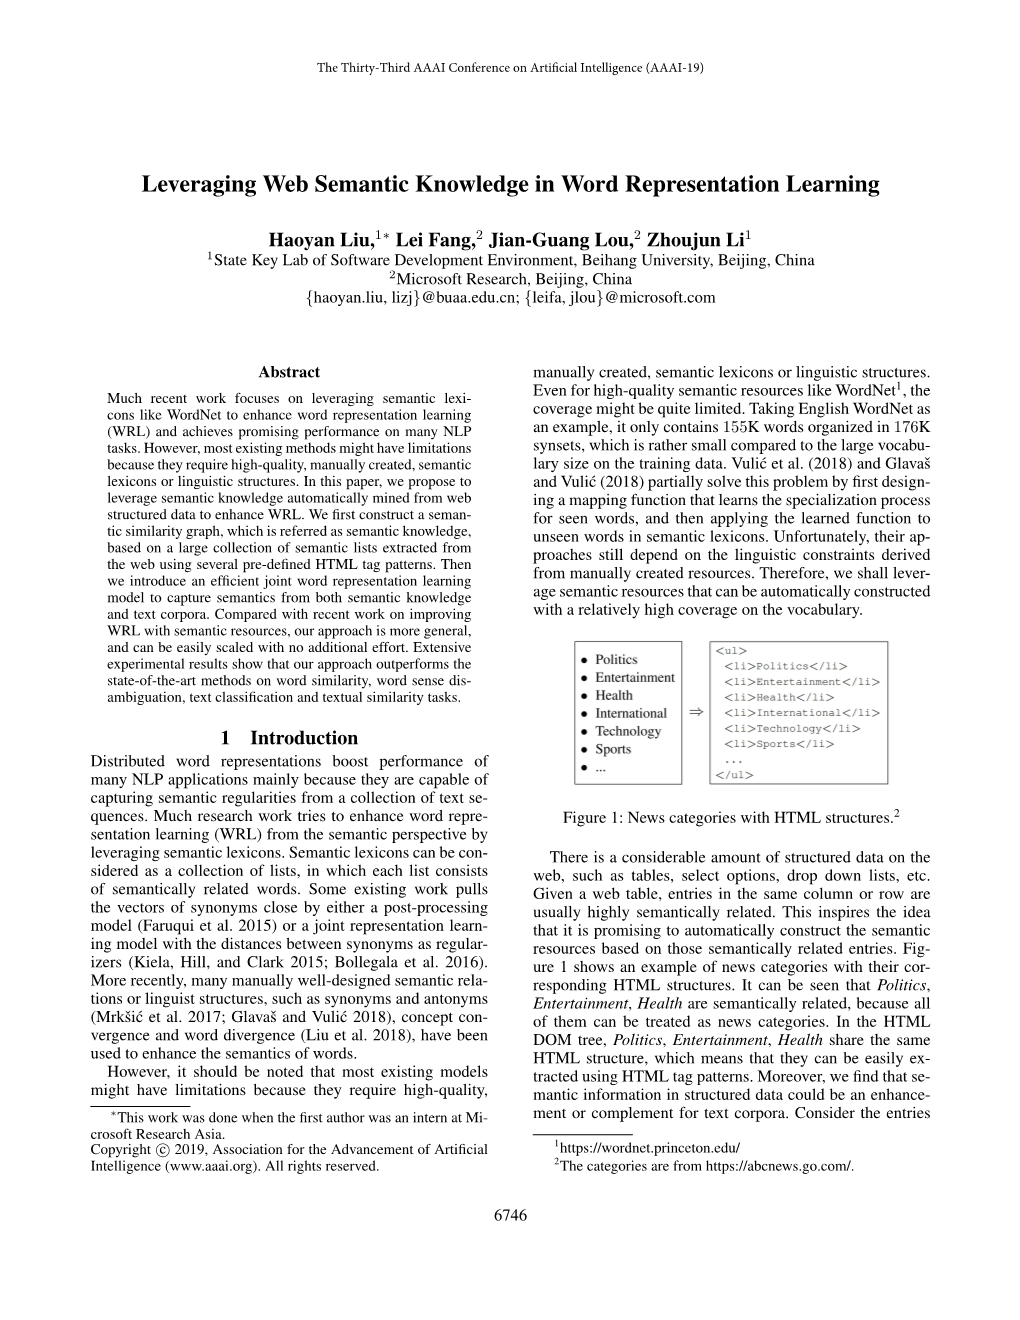 Leveraging Web Semantic Knowledge in Word Representation Learning